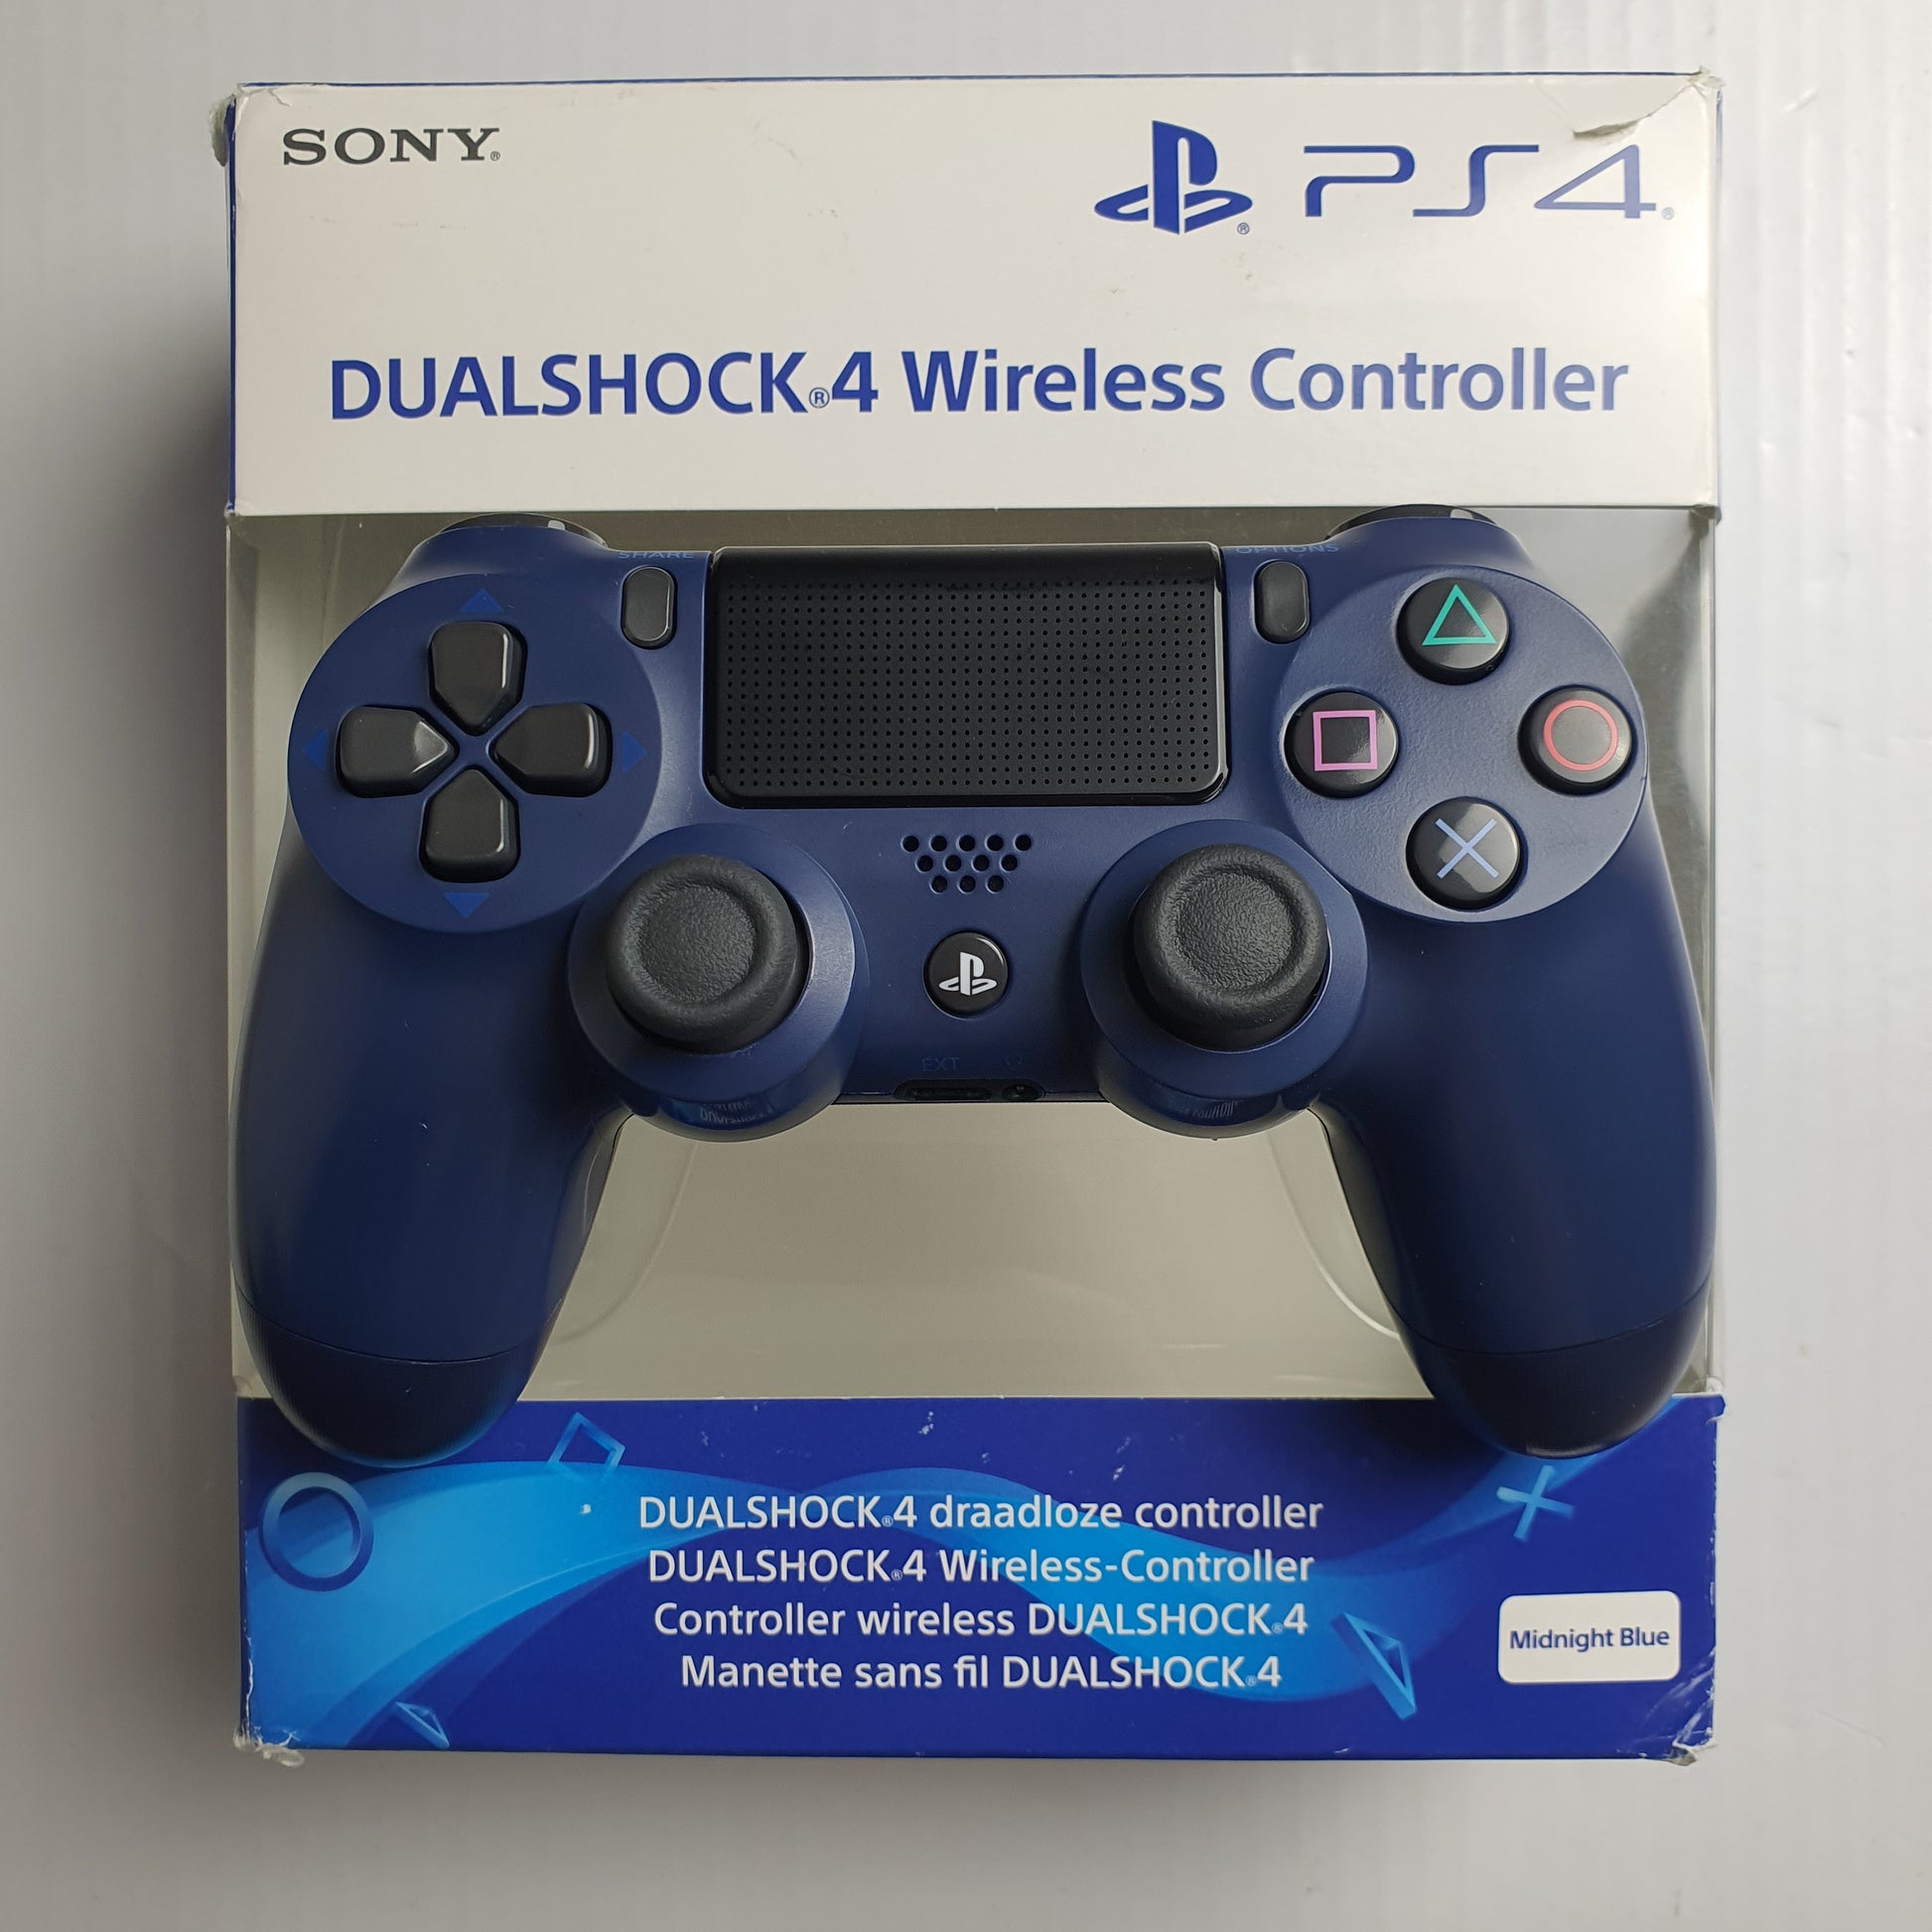 4 PlayStation DualShock Tech – Dogghead Blue\' \'Midnight Offical PS4 Wireless Sony Boxe